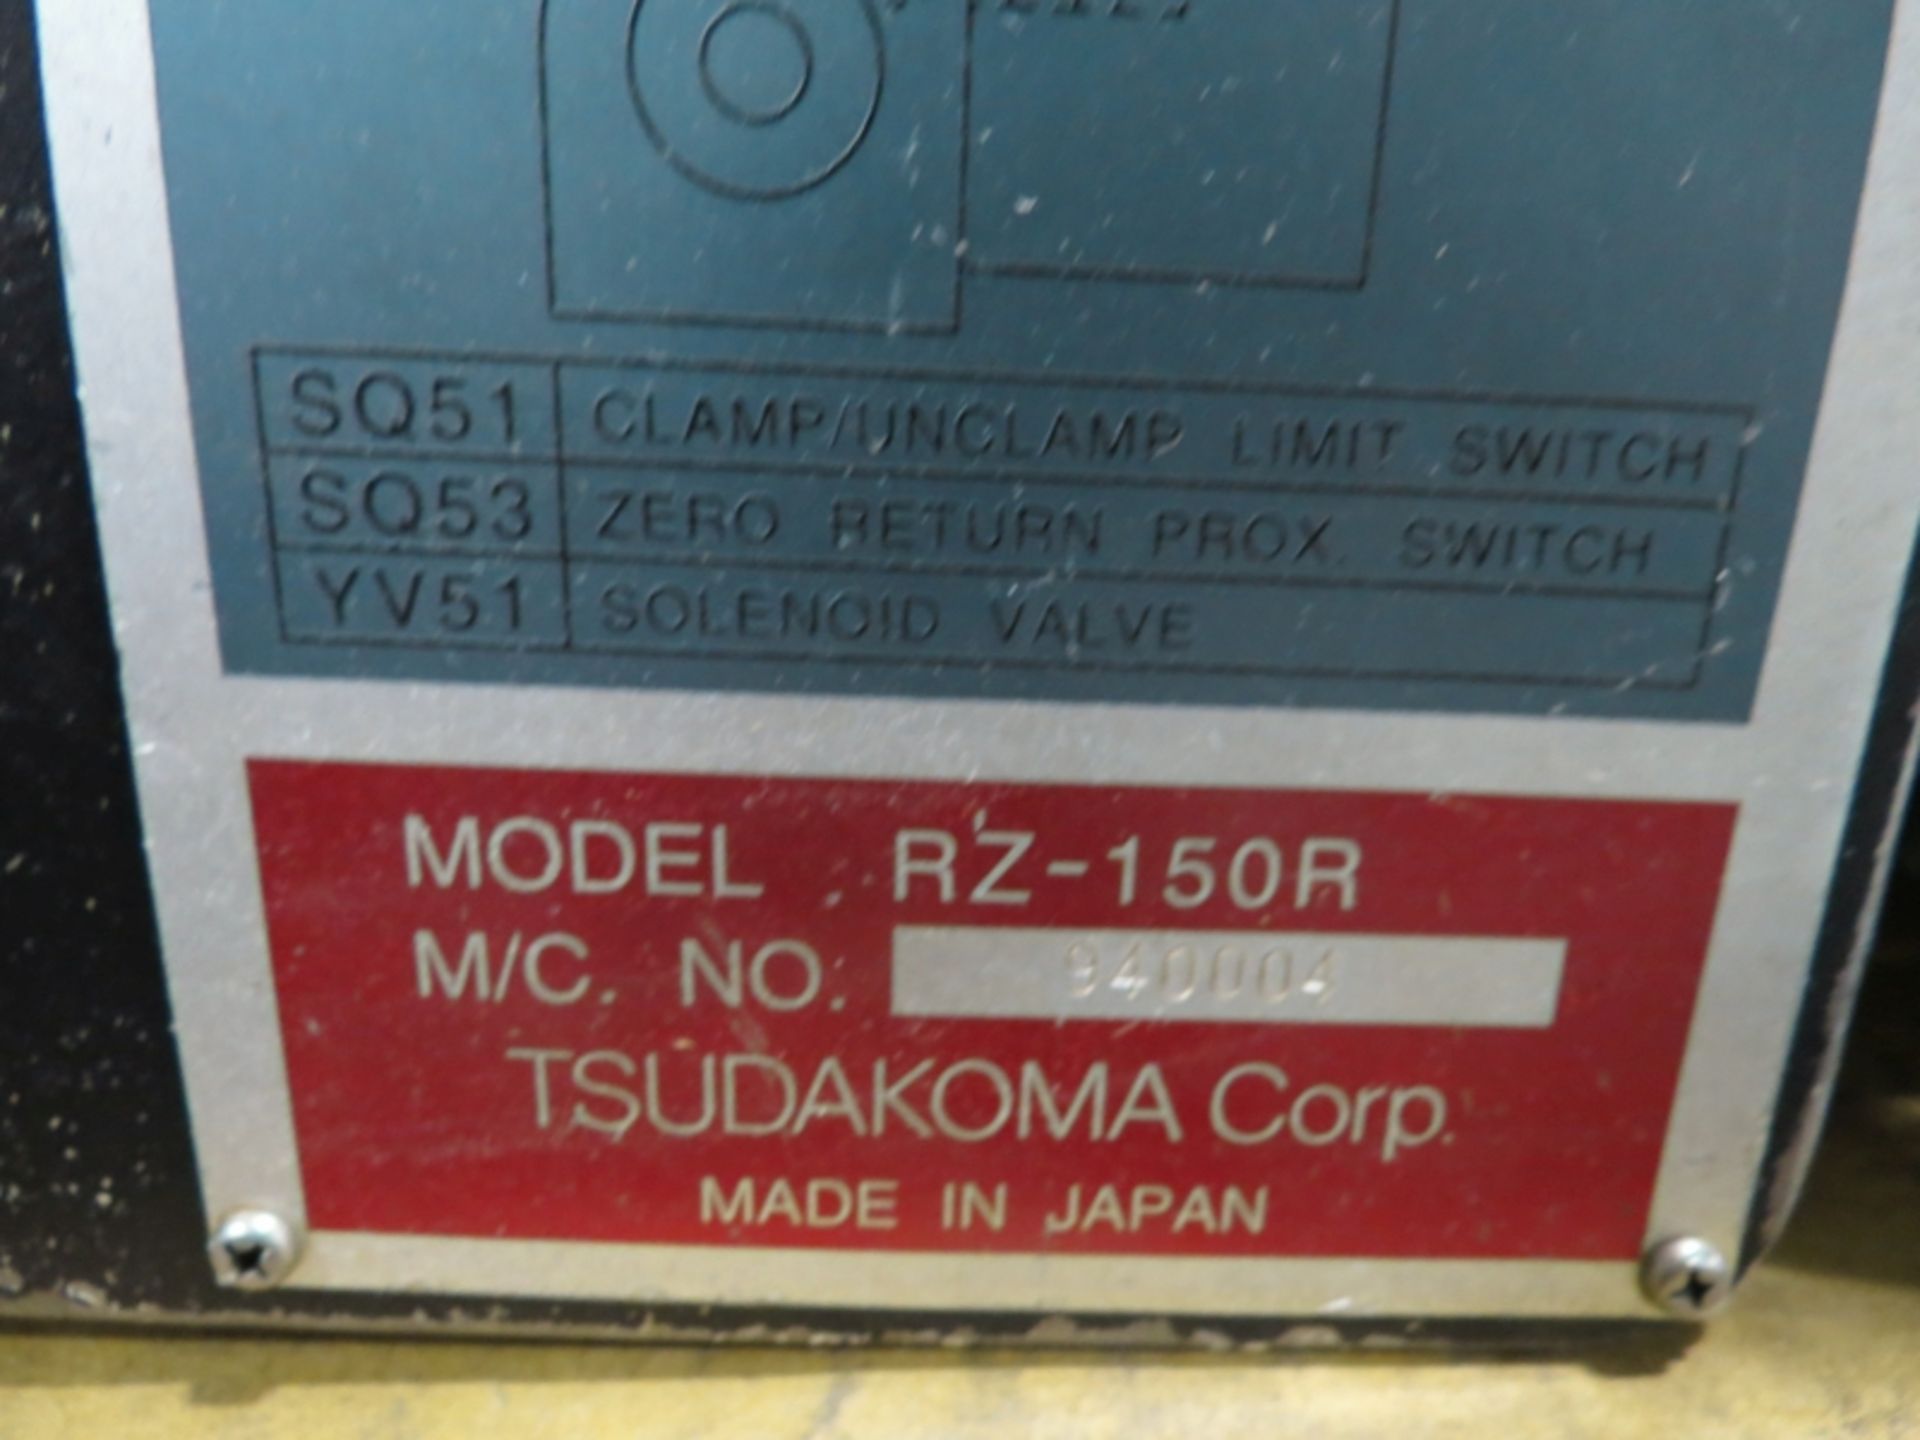 Tsudakoma 4 Axis Rotery Table RZ-150R s/n 940004 - Image 5 of 5